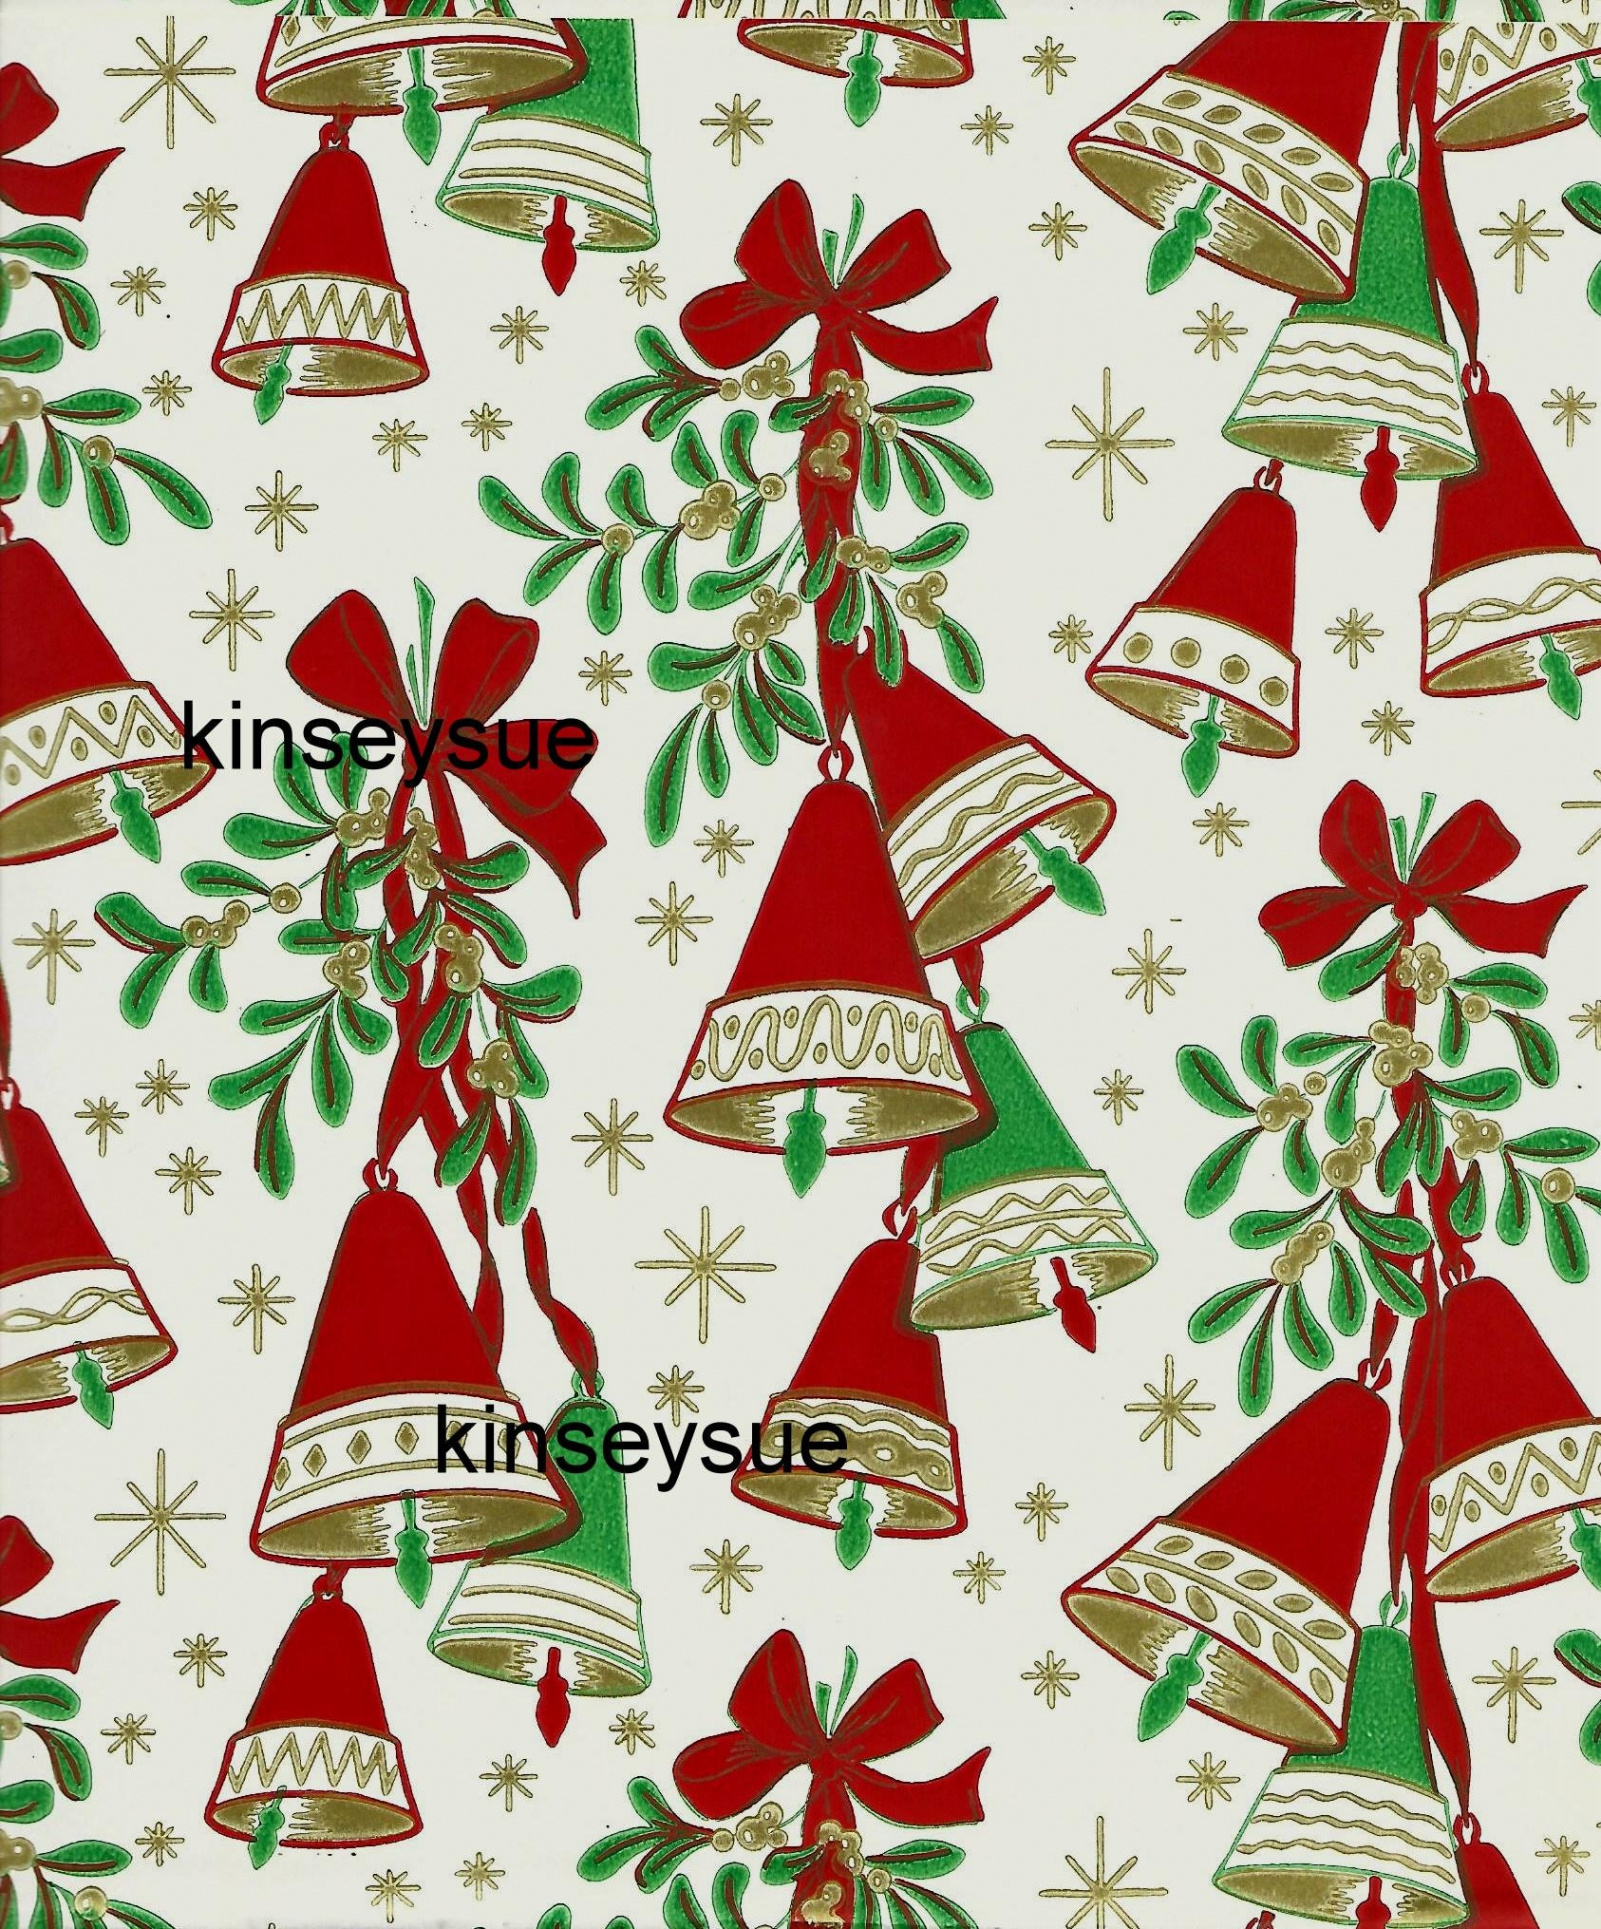 Vintage Christmas Wrapping Paper Red and Green Christmas Bells Gold Trim  Red Ribbons Mistletoe One Flat Sheet s-early s Gift Wrap